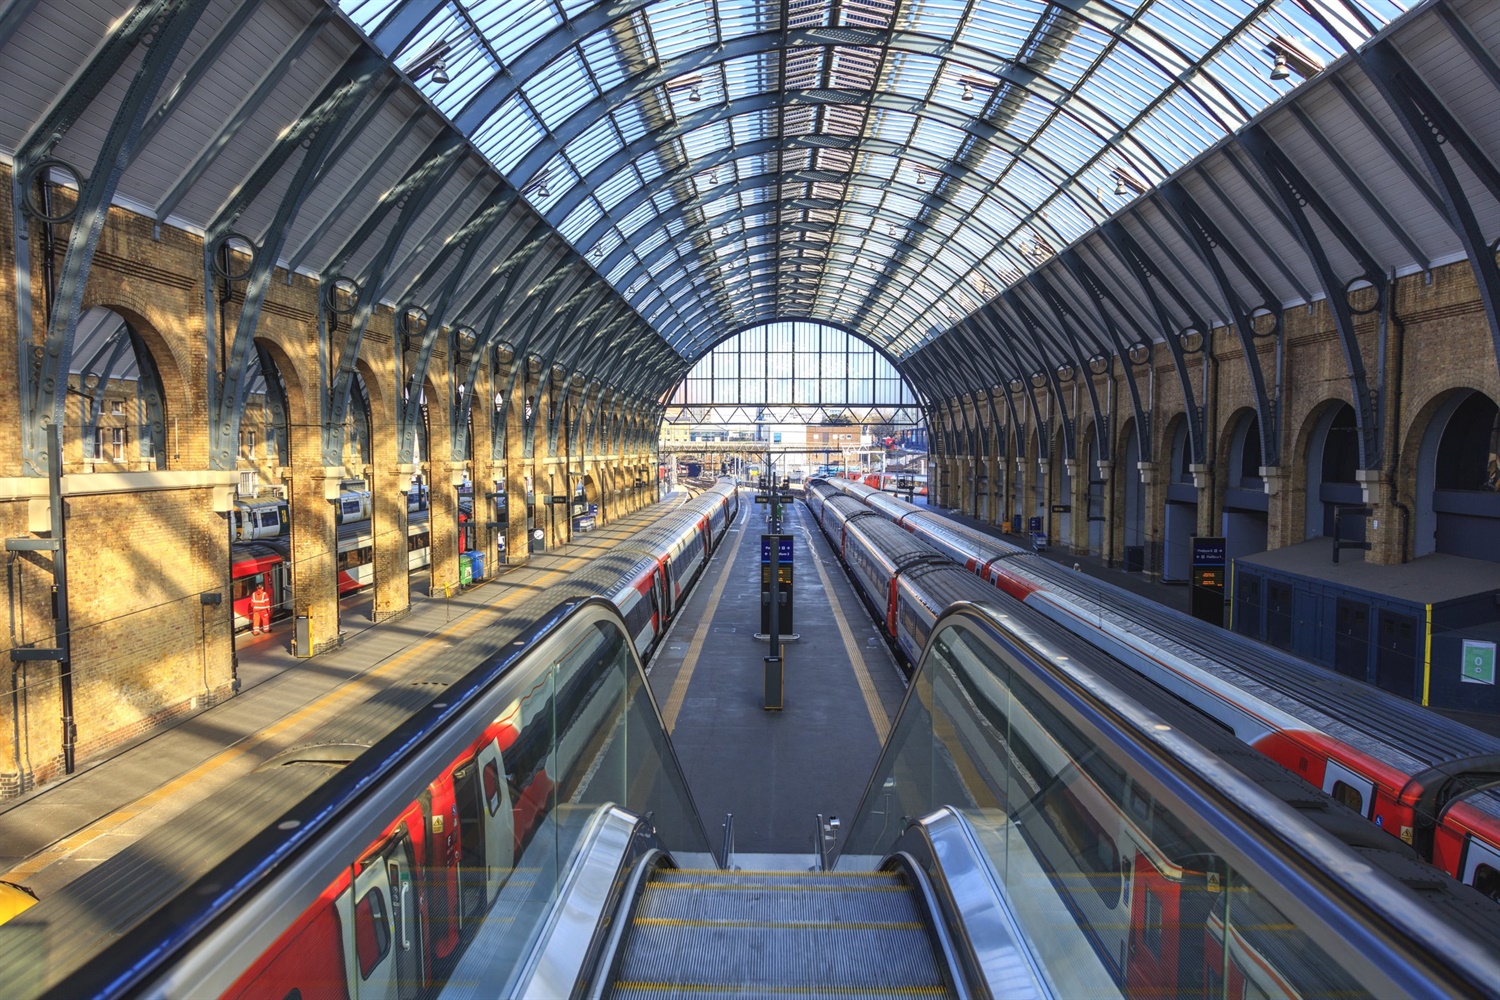 90 decrease in King’s Cross station users